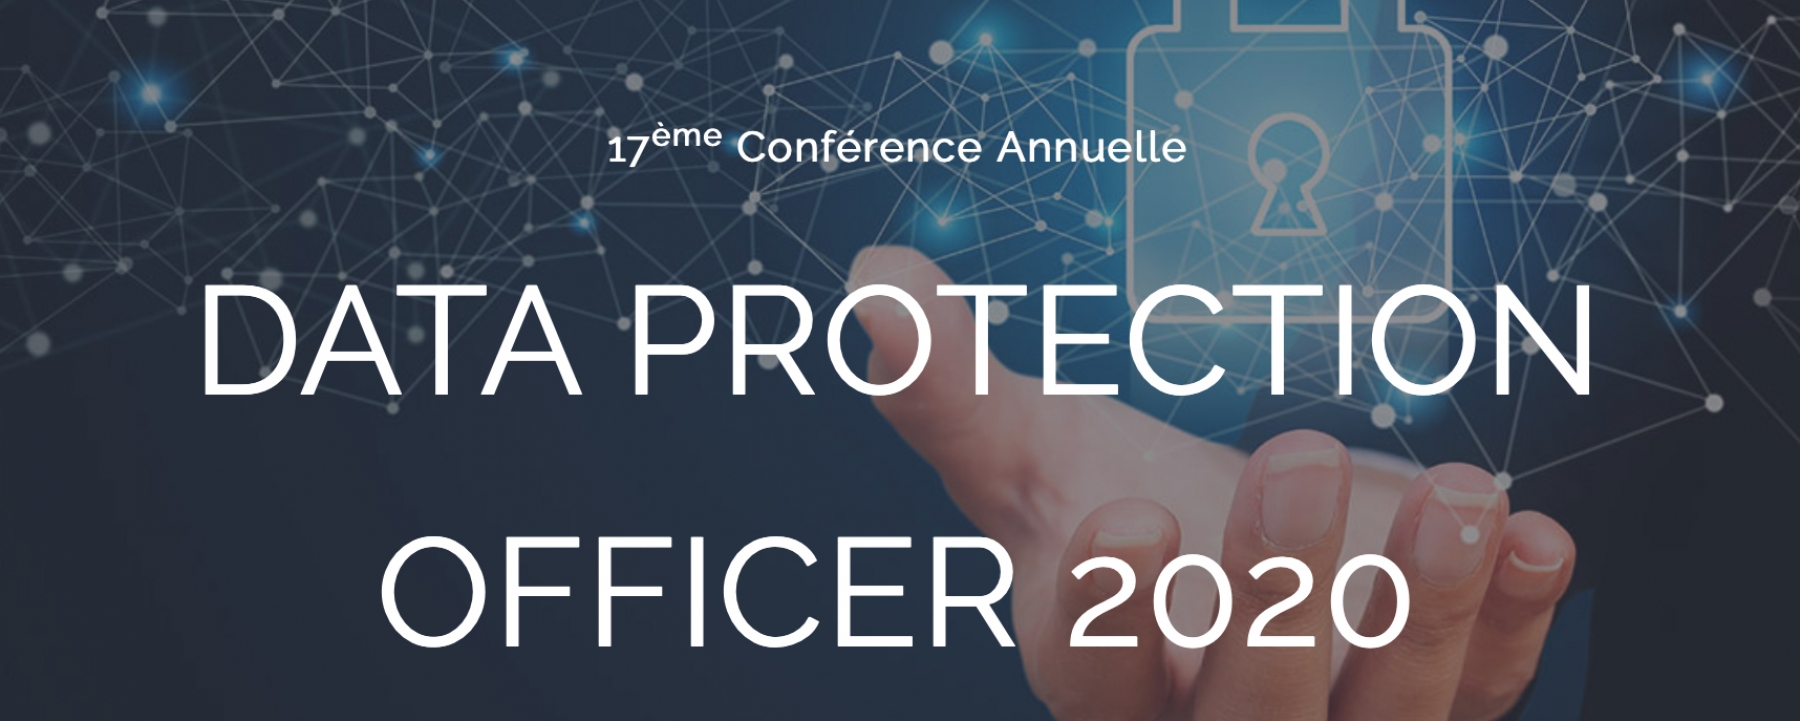 Conférence Data Protection Officer 2020